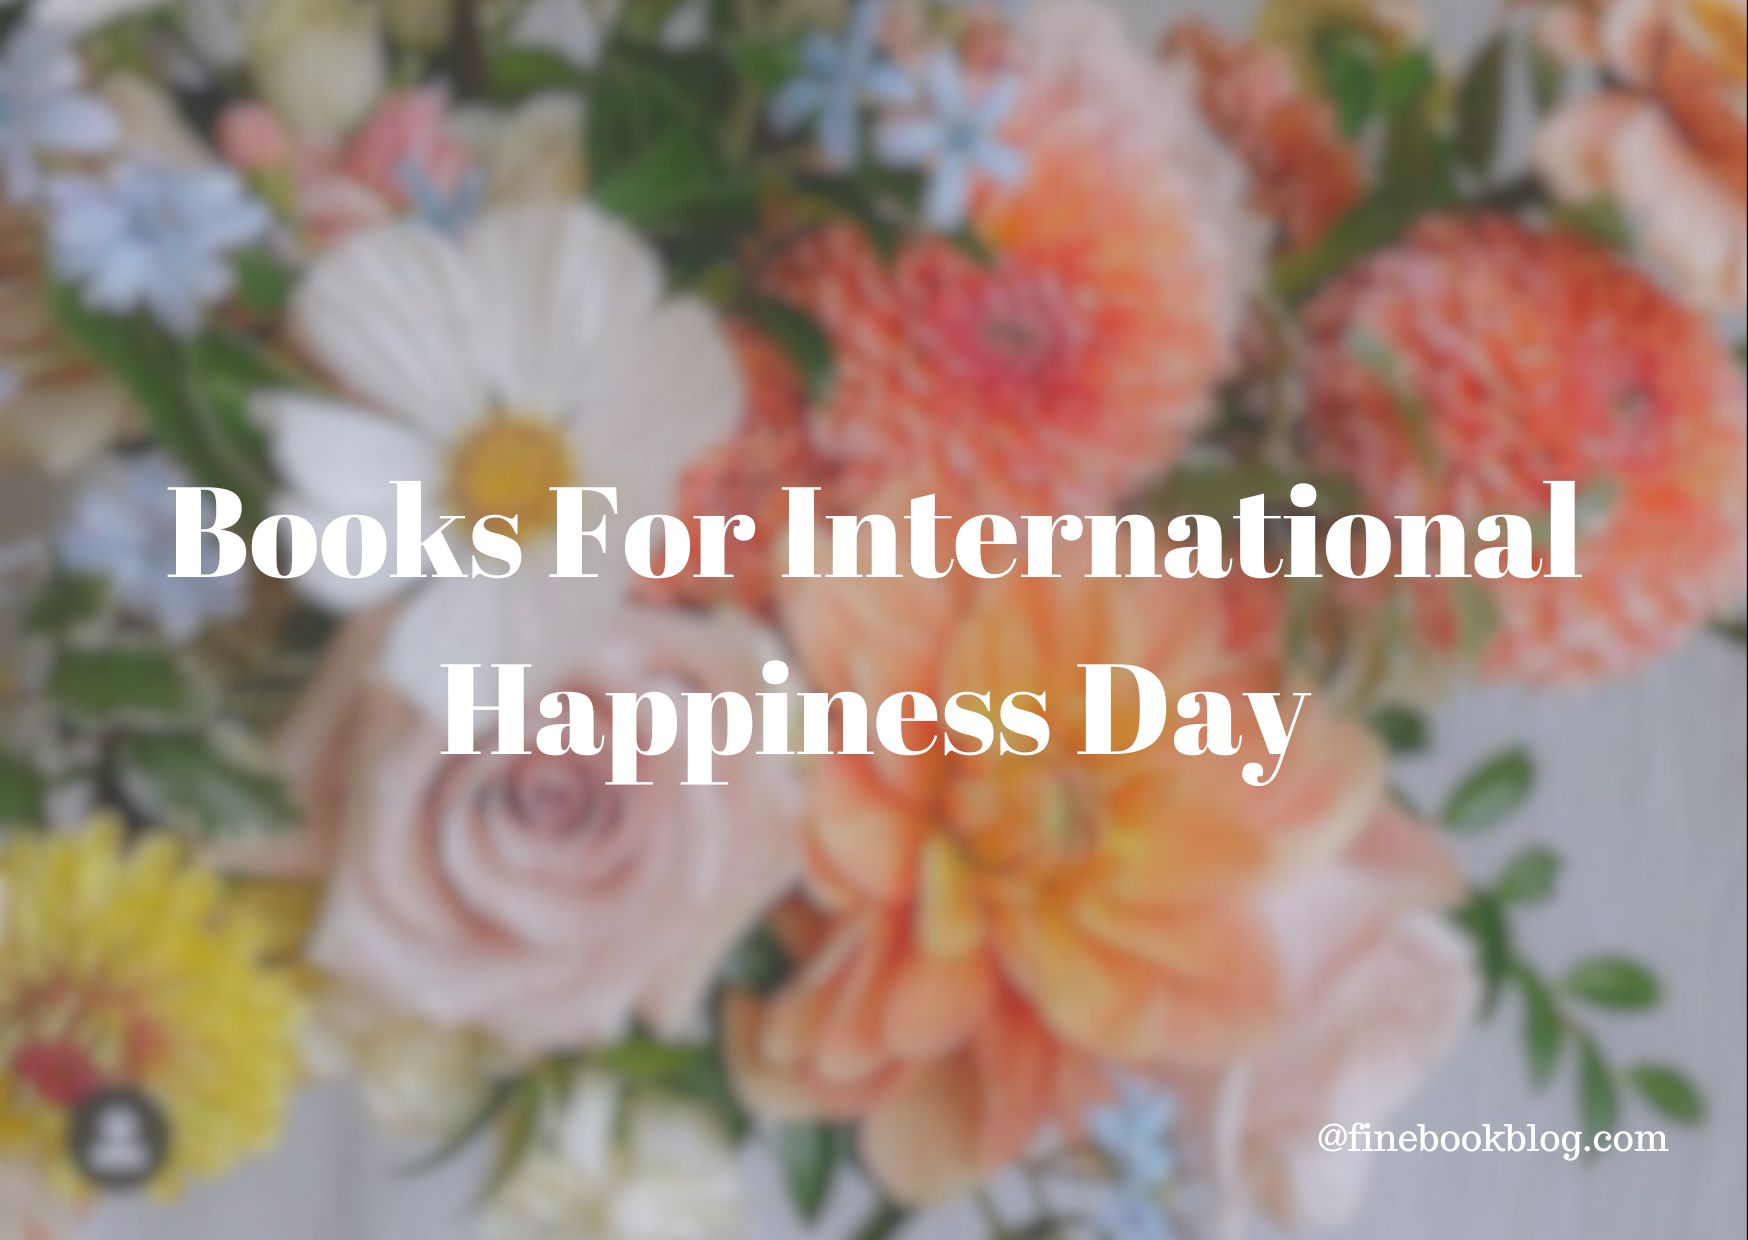 Books-for-international-happiness-day-feel-good